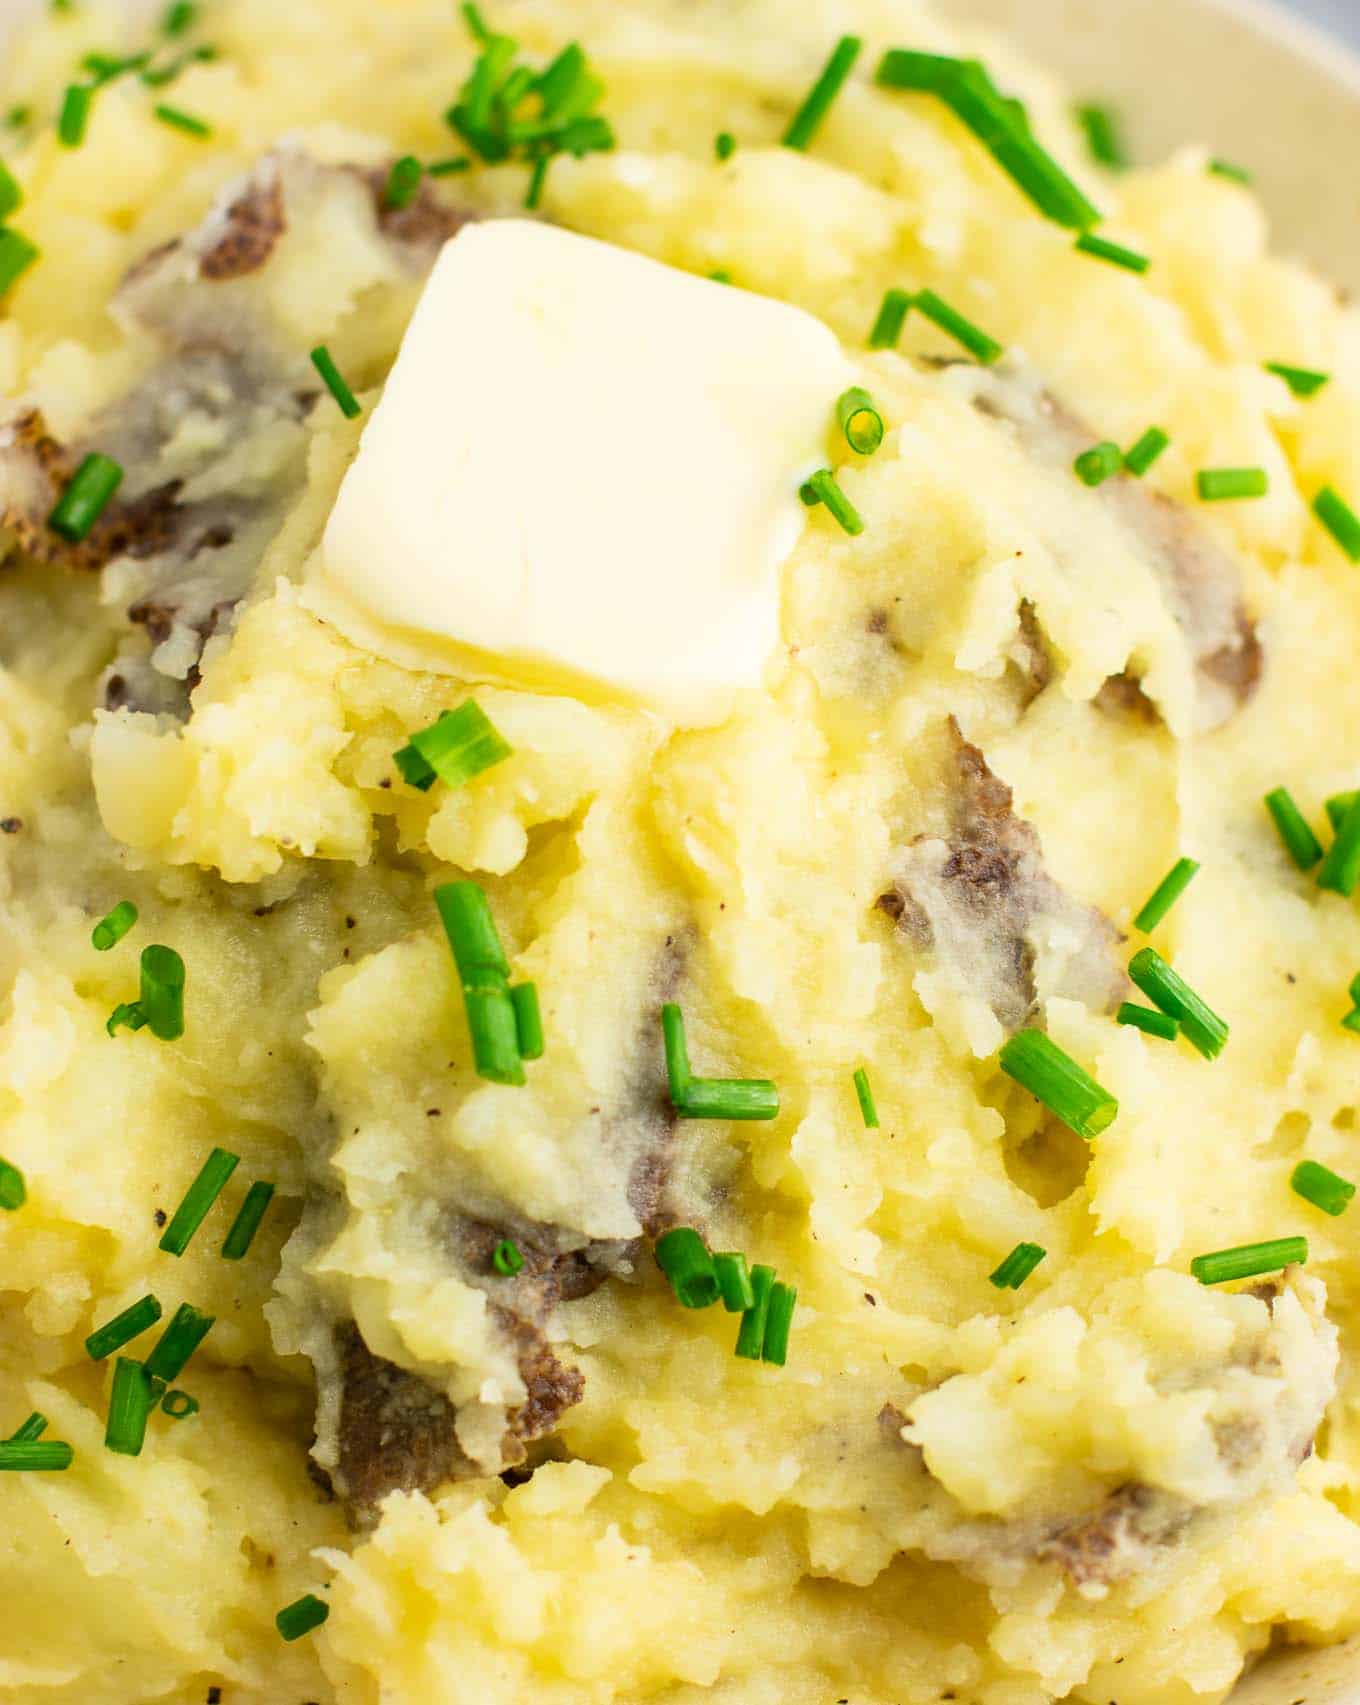 mashed potatoes up close topped with a pat of vegan butter